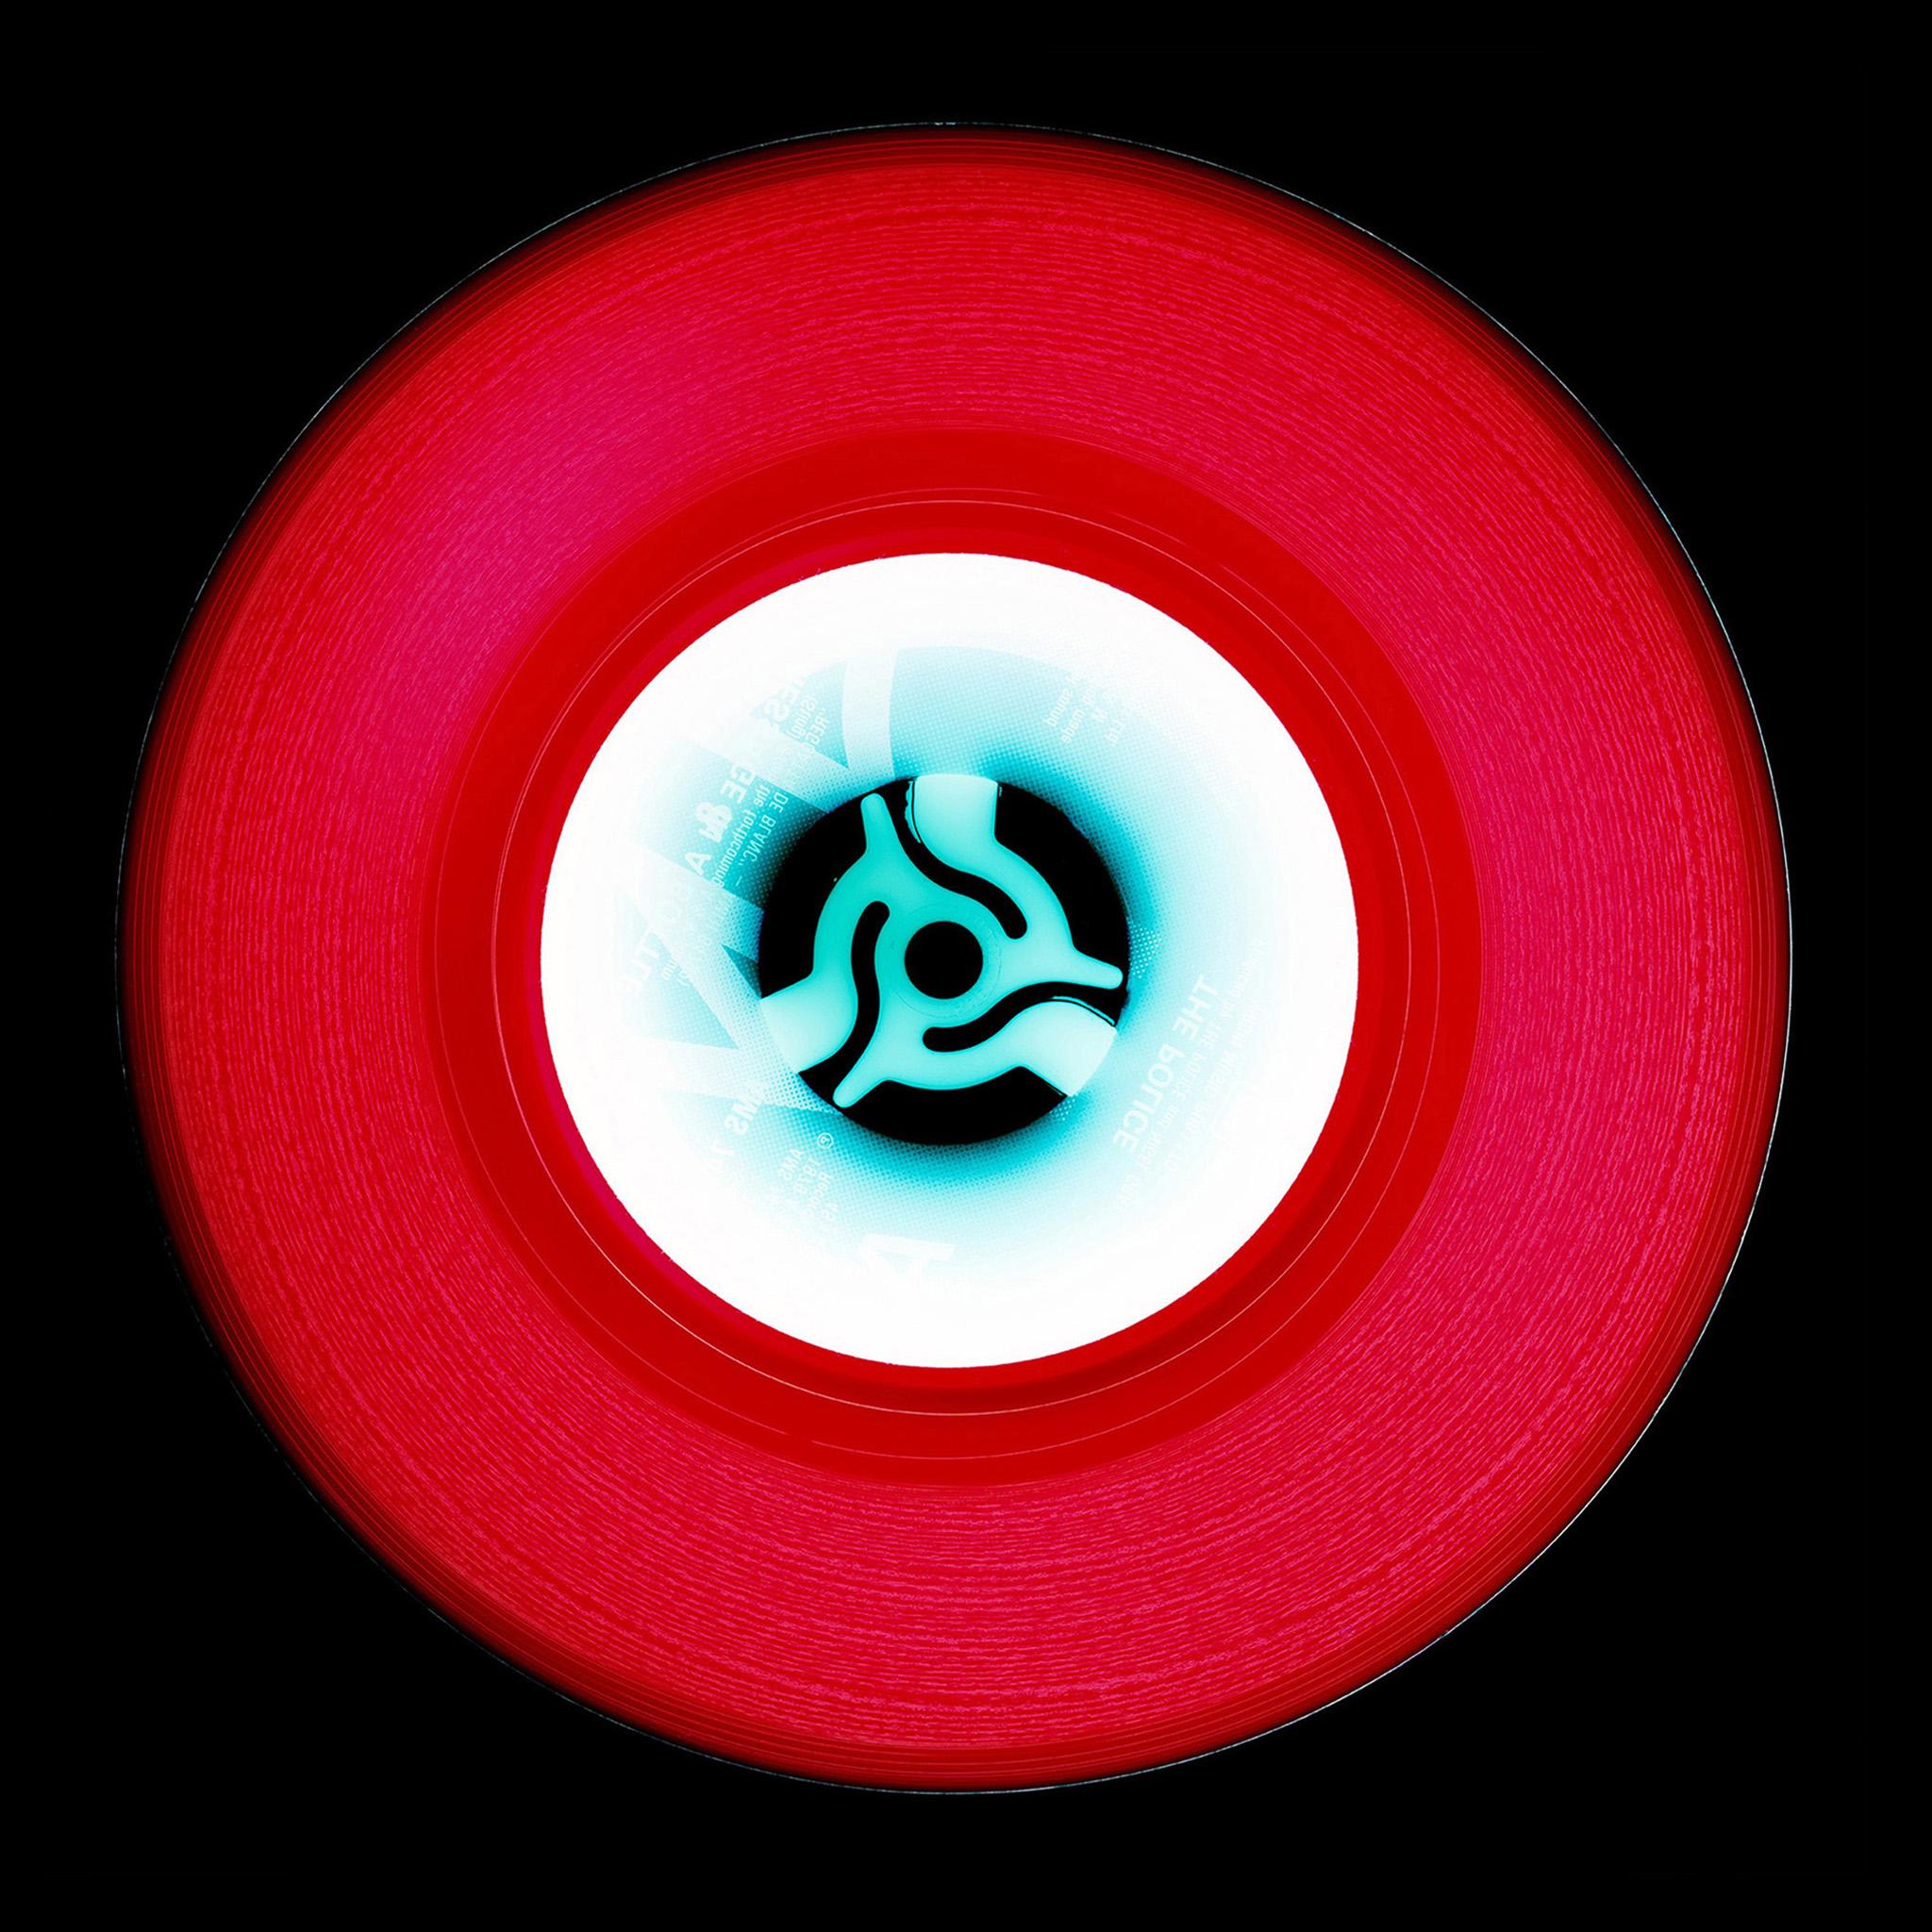 Heidler & Heeps Print - Vinyl Collection, A (Cherry Red) - Conceptual Pop Art Color Photography